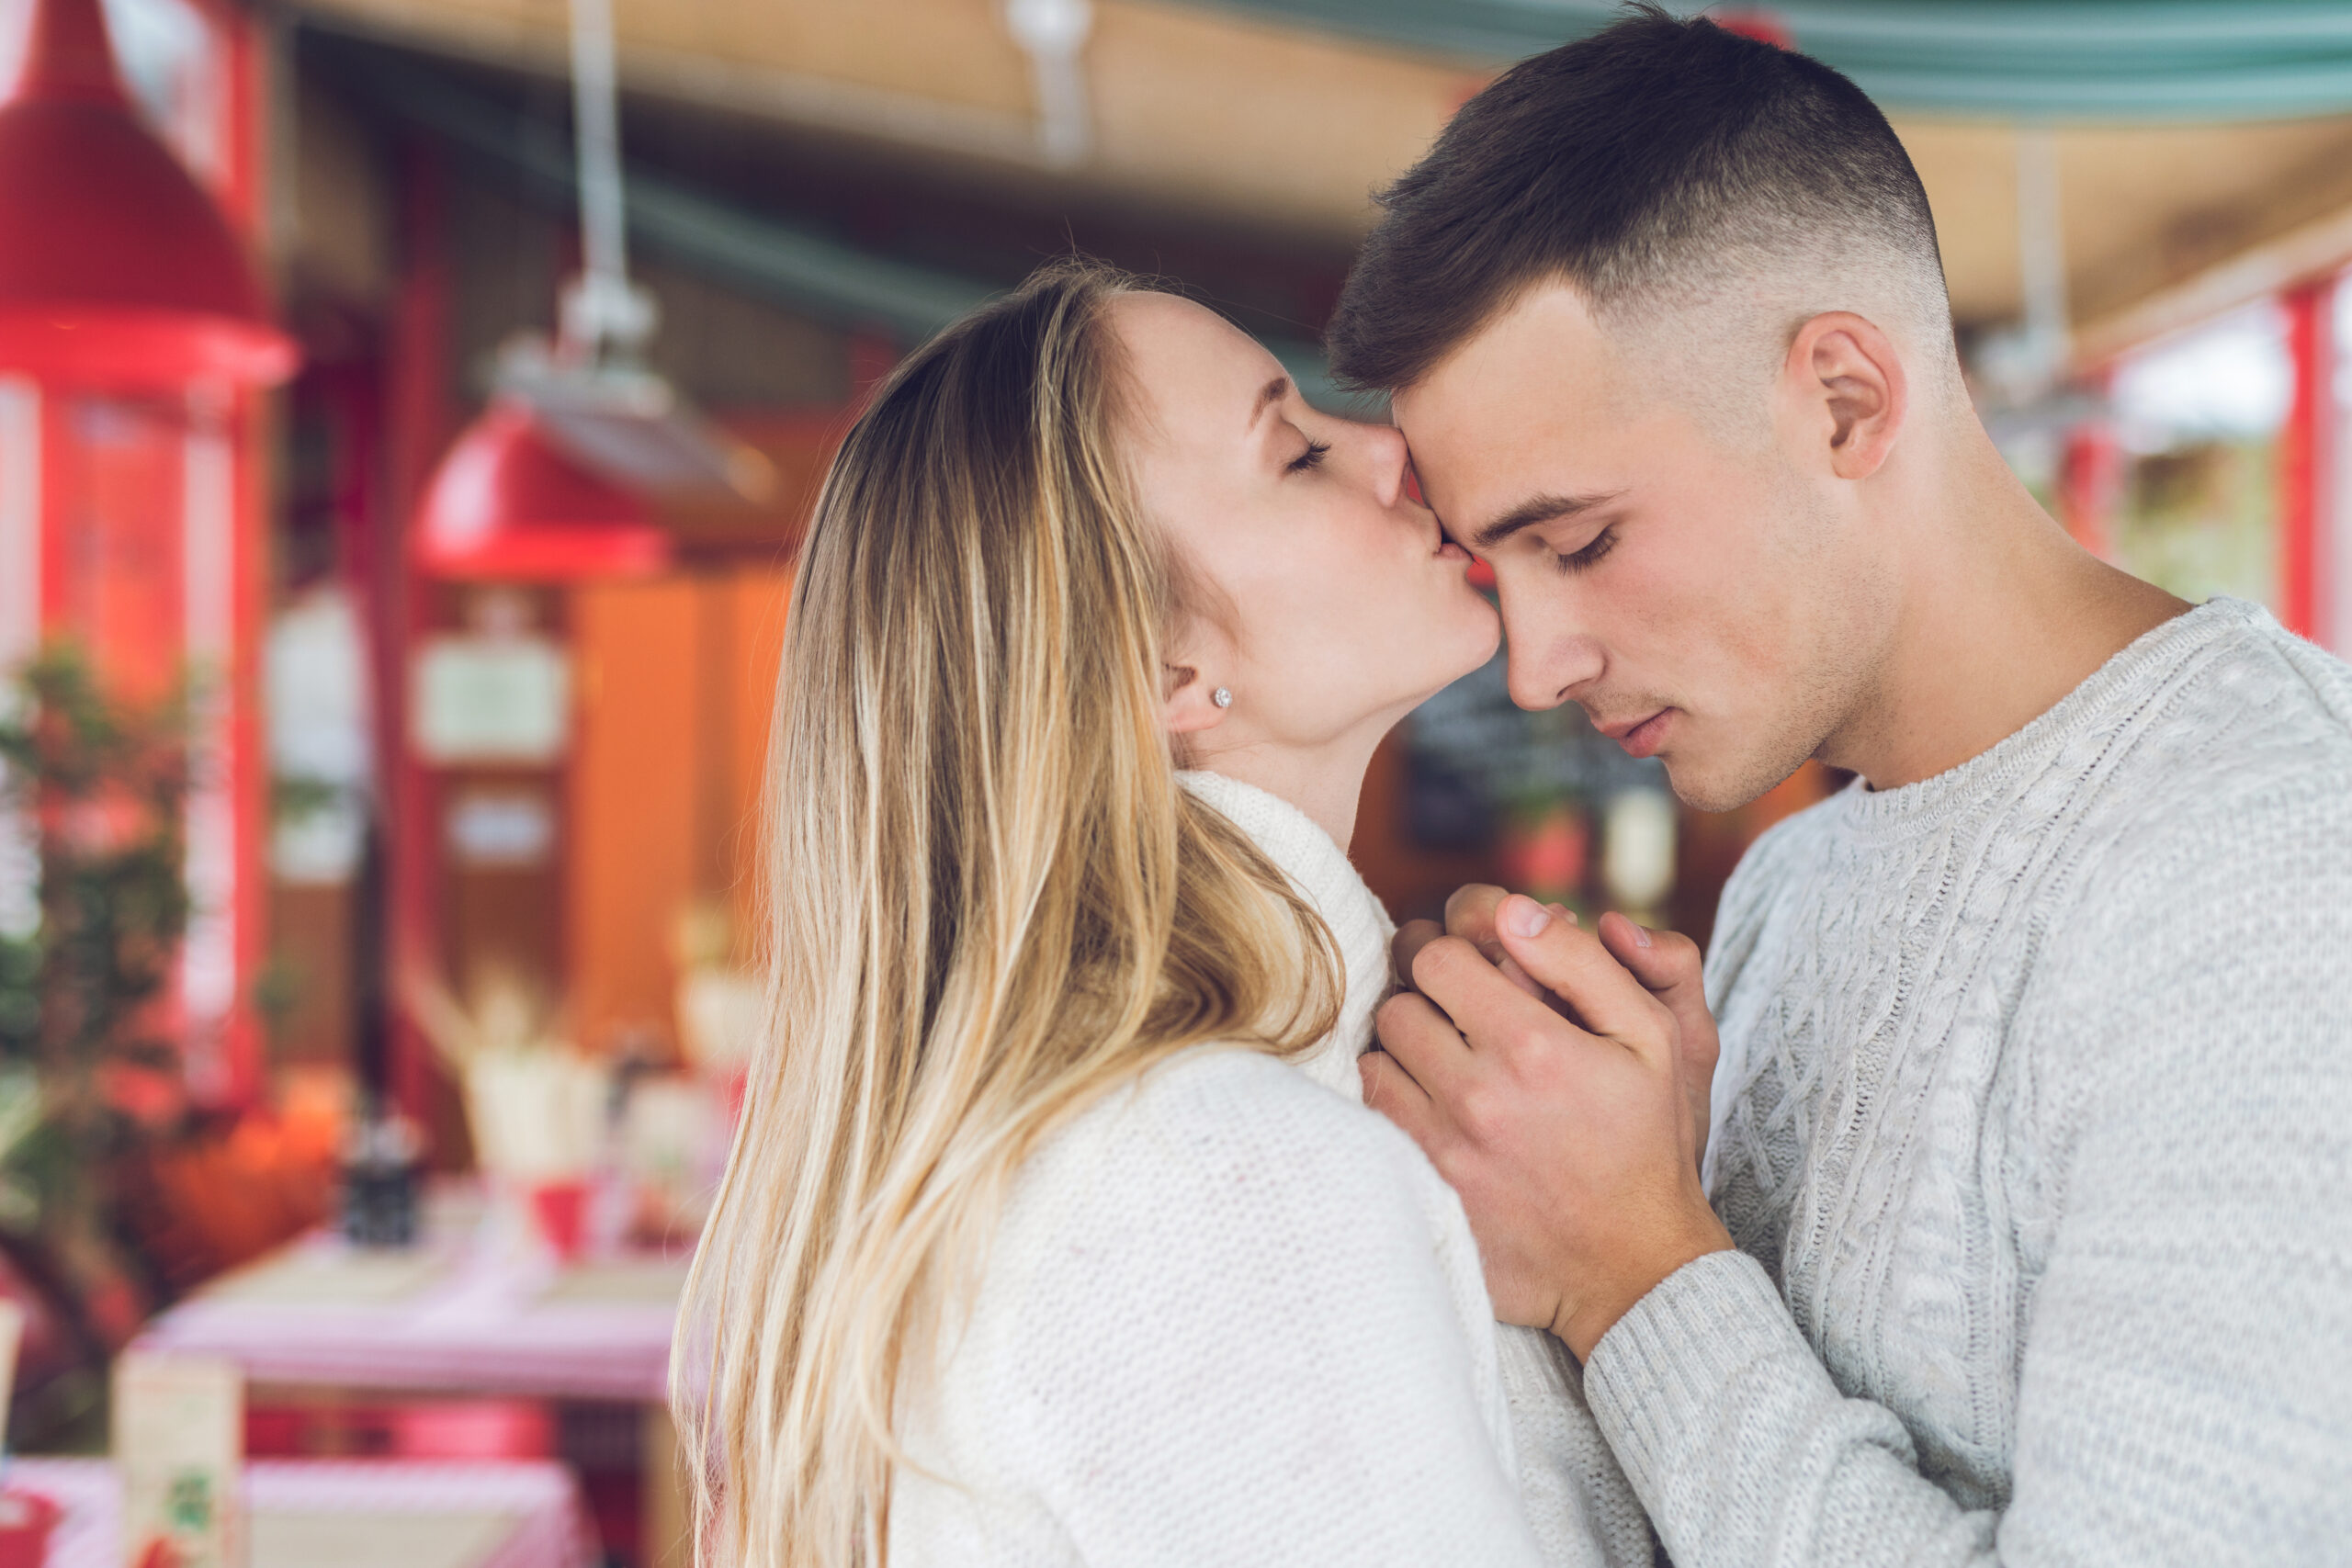 habits of happy couples - blond woman kissing forehead of her boyfriend as they stand inside restaurant